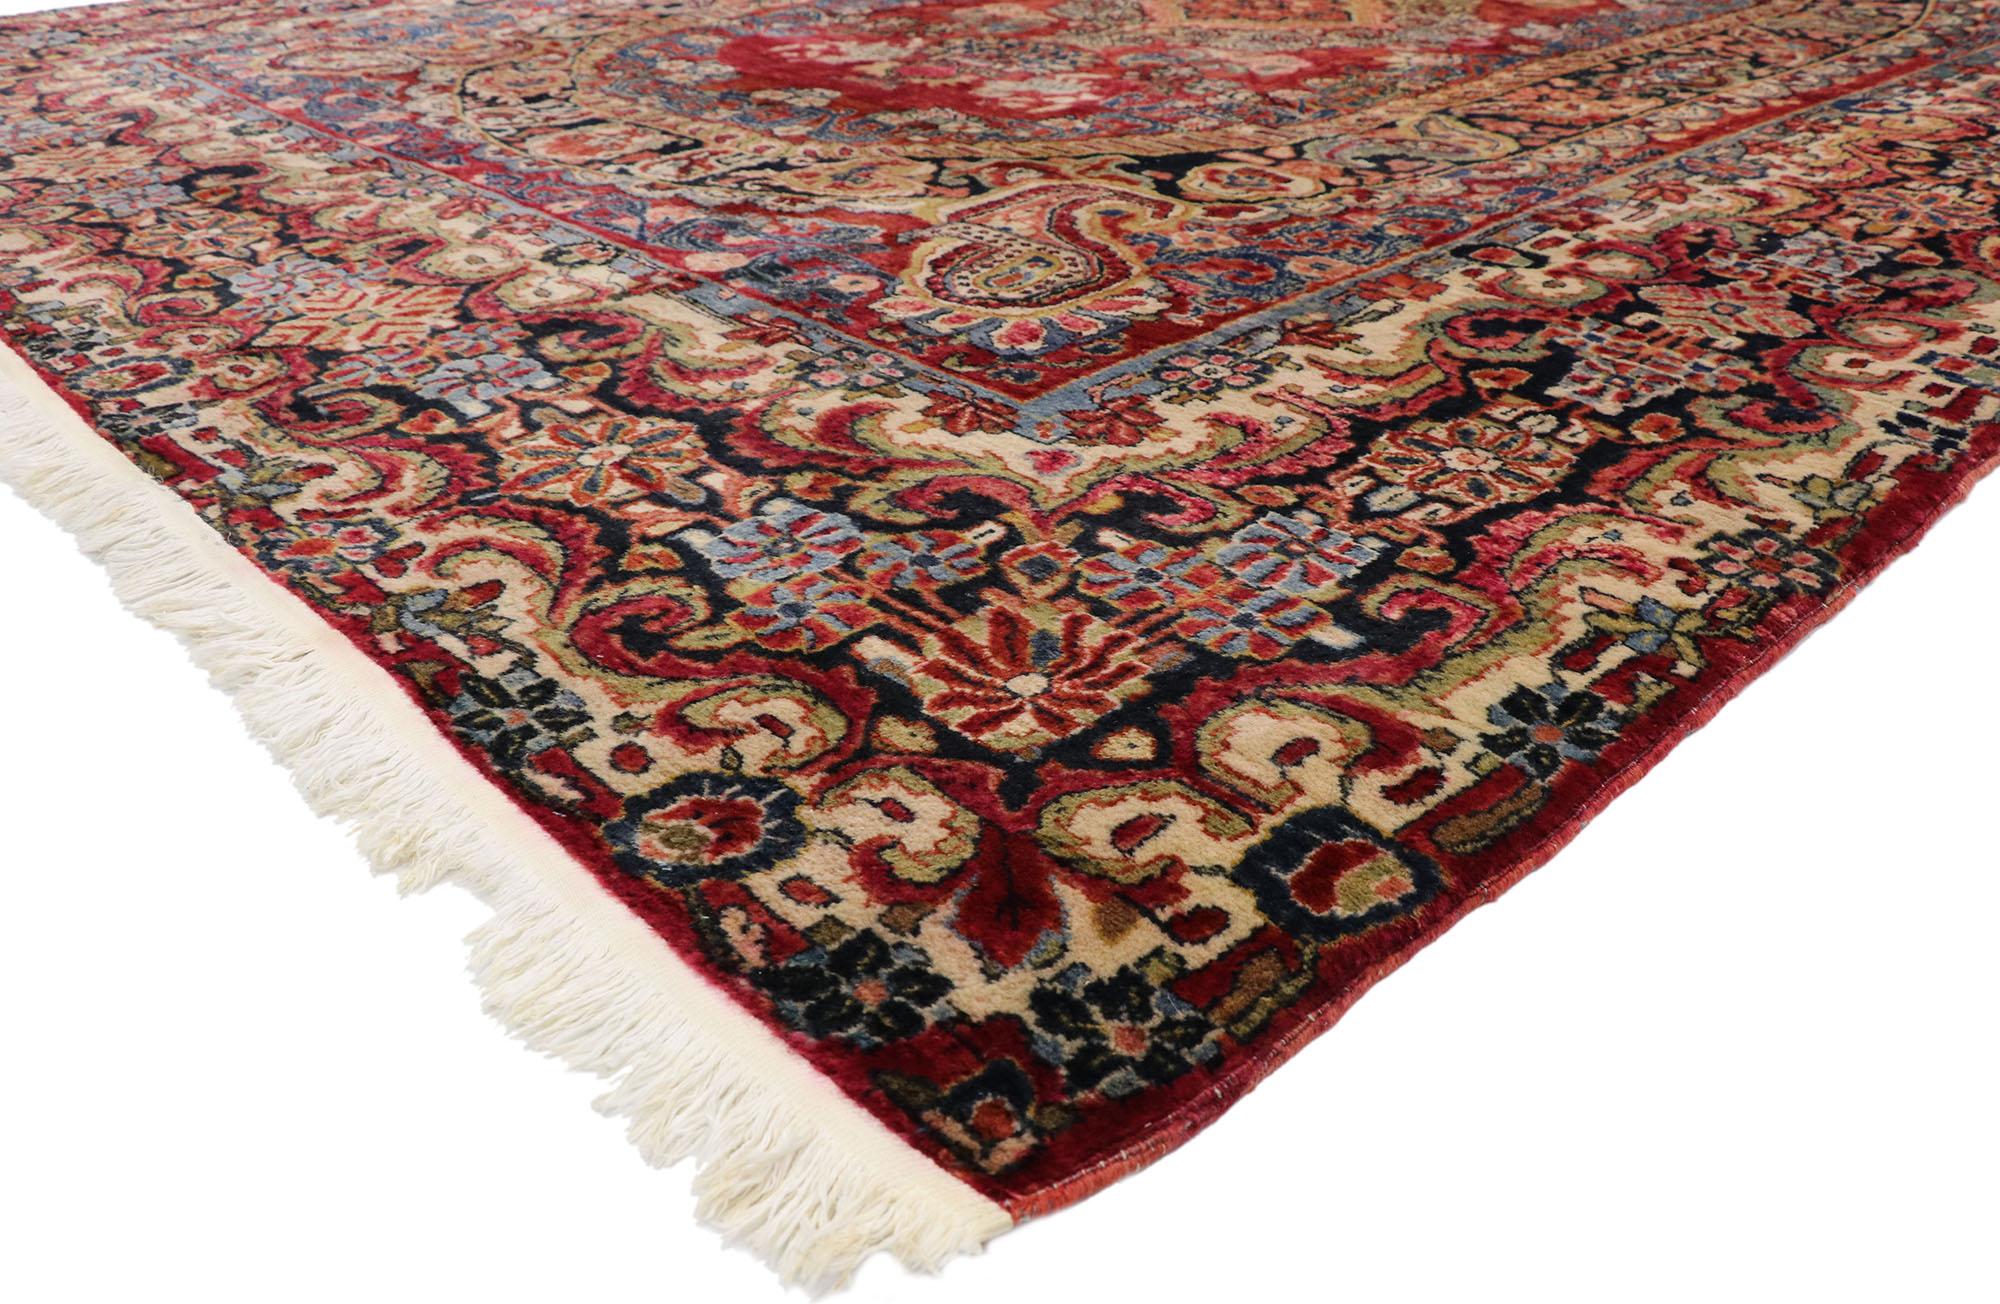 77386 antique Persian Sarouk rug with Floral Victorian style. Opulence and grace with beguiling ambiance, this hand knotted wool antique Persian Sarouk area rug beautifully highlights Victorian style. The most striking element is the lobed diamond